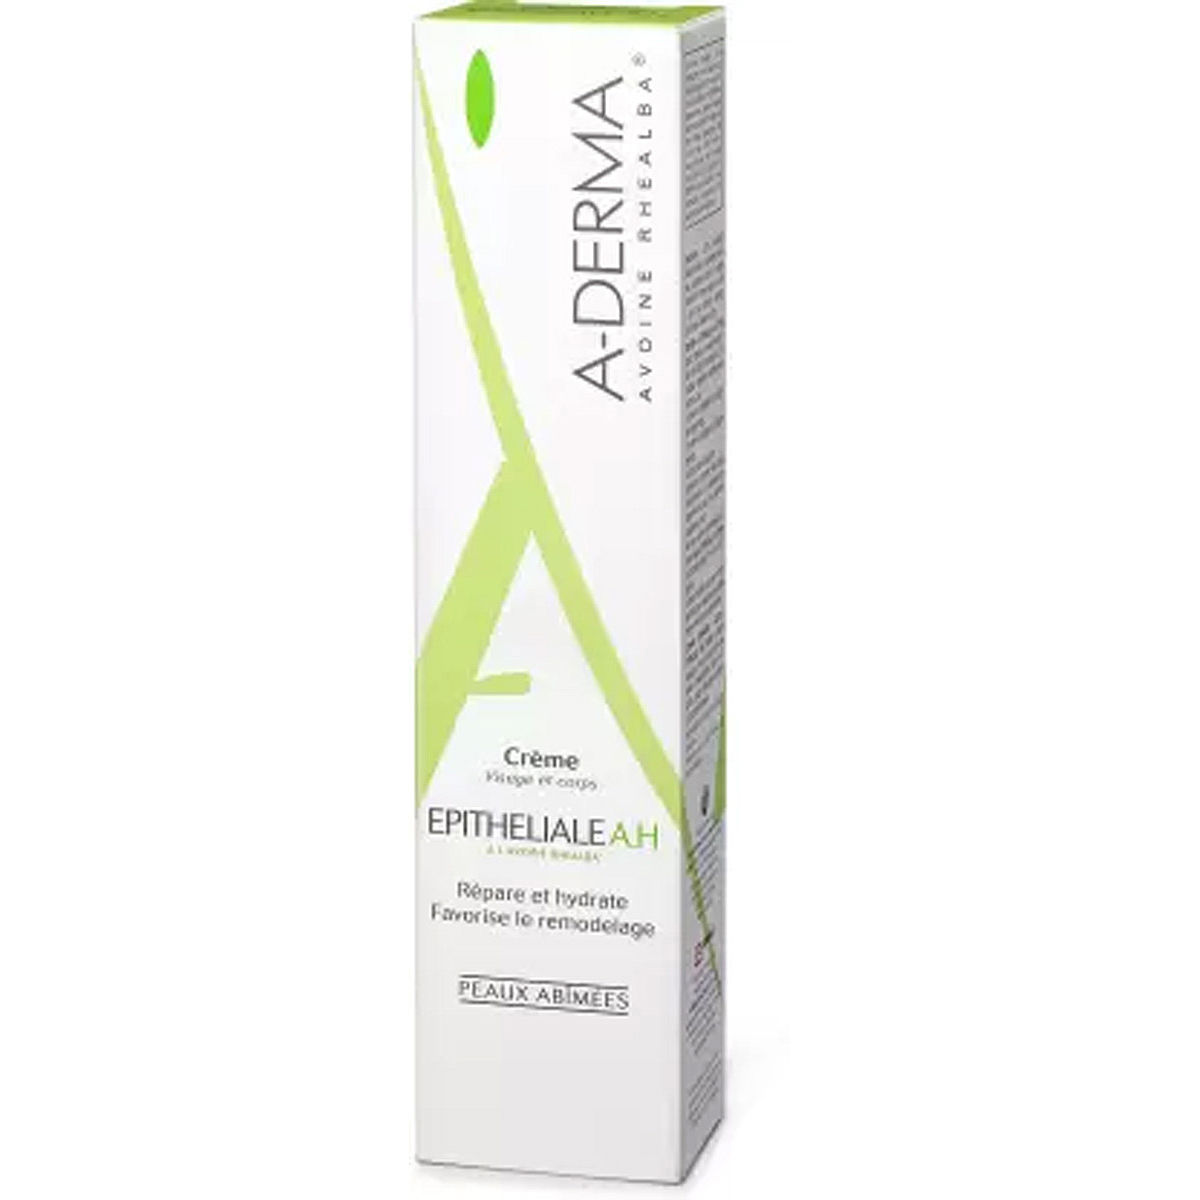 A-Derma Epitheliale A.H. Cream, 35 ml, Pack of 1 